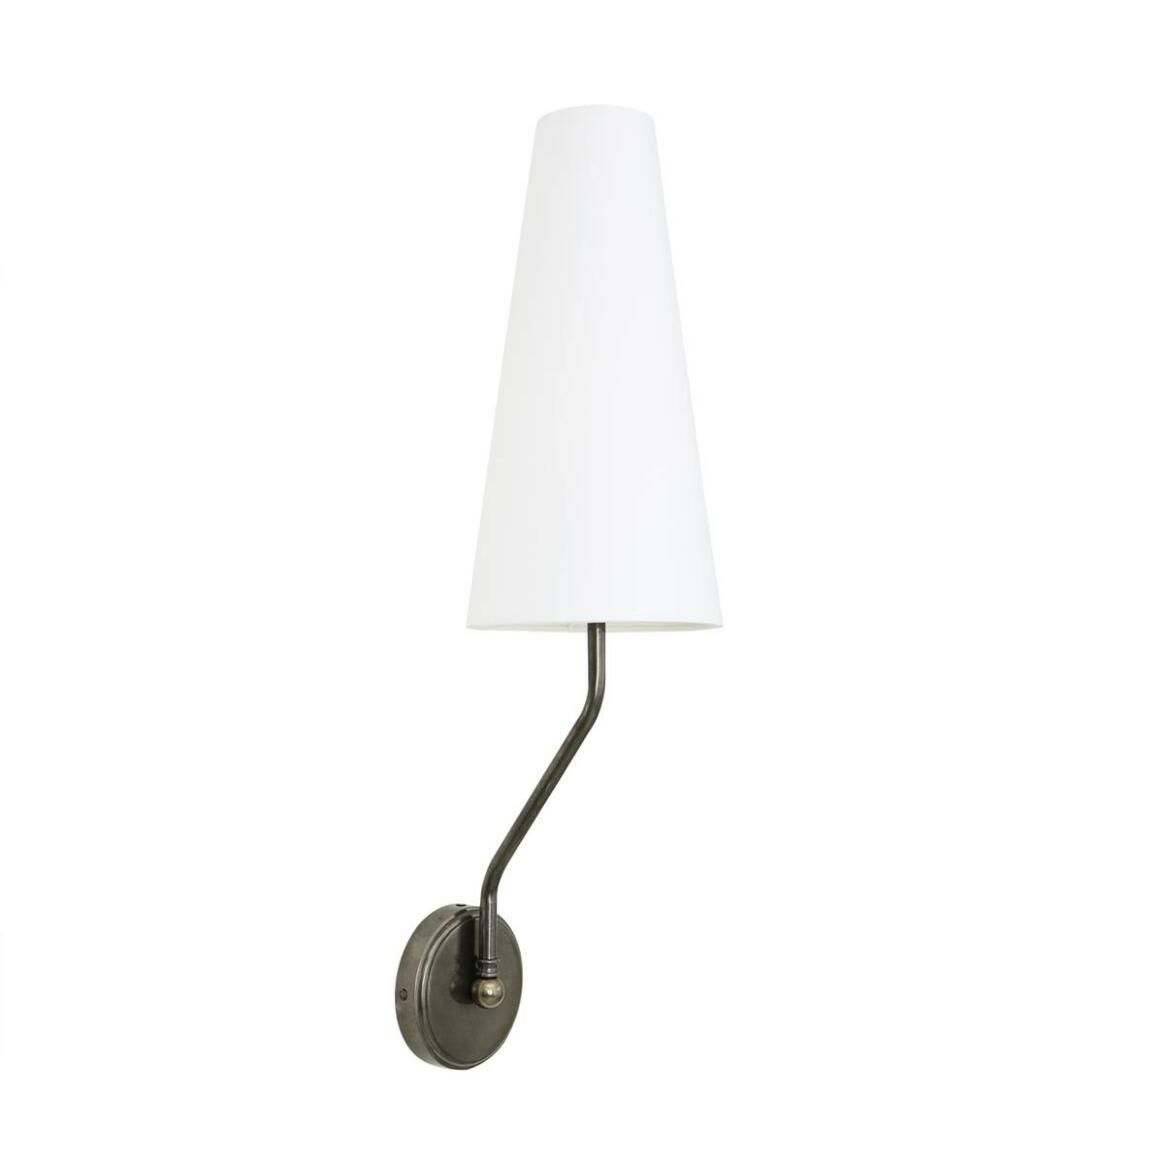 Rhyl Slendor Wall Light with Tall Fabric Shade main product image